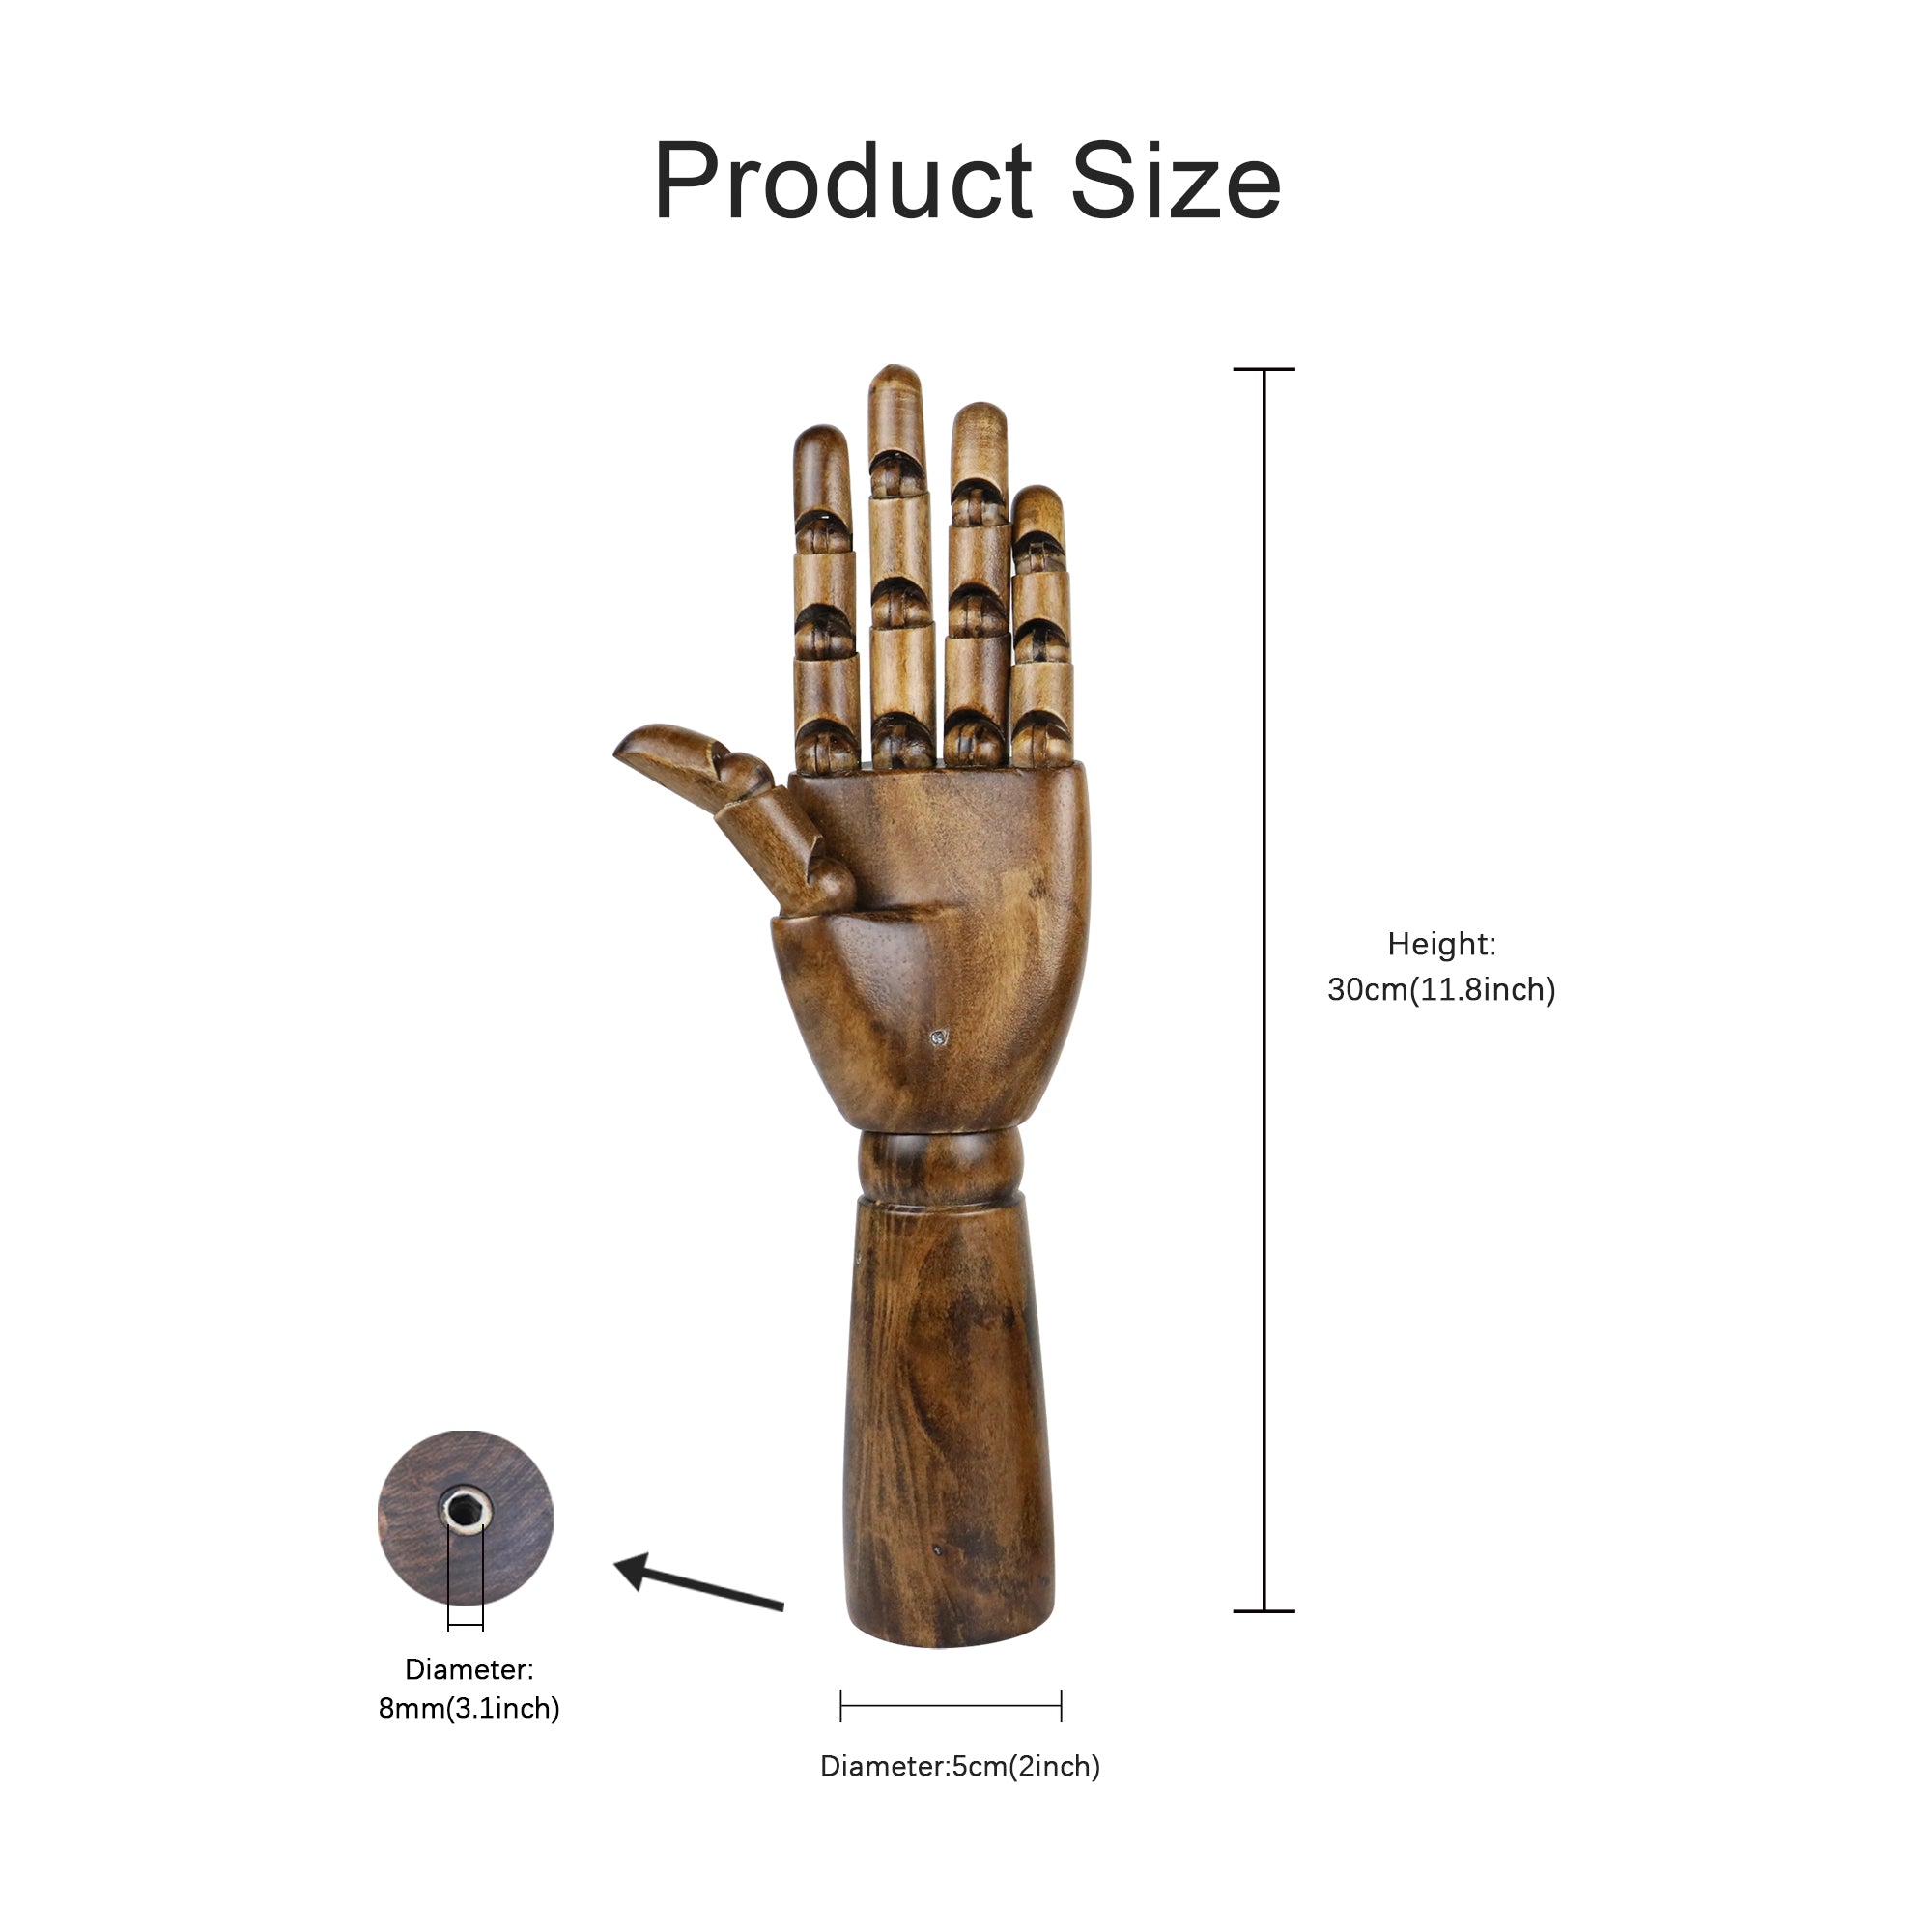 Mannequin with Flexible Wooden Fingers for Drawing, Art Supplies, Artists Wooden Manikin - Perfect for Home Decoration/Drawing The Human Figure, Size